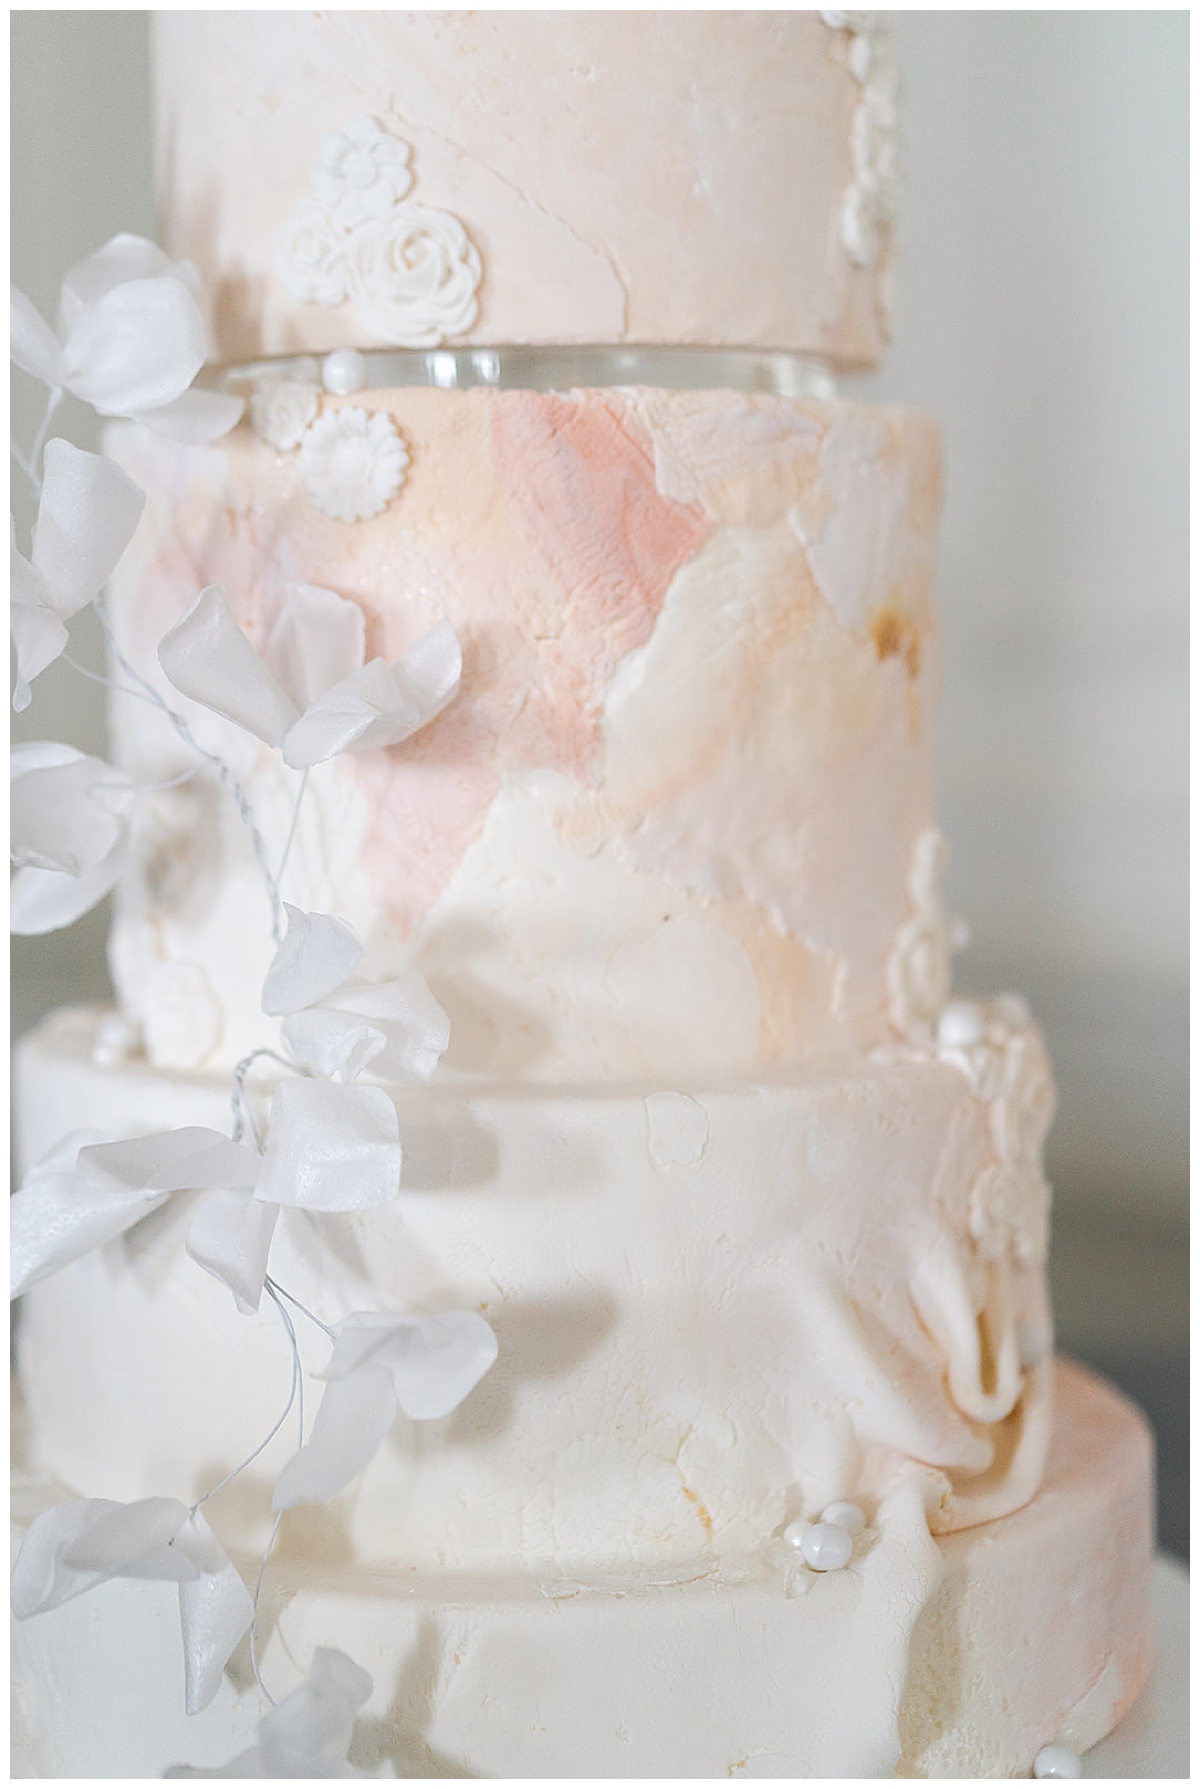 Stunning cake details for Editorial at The Mason